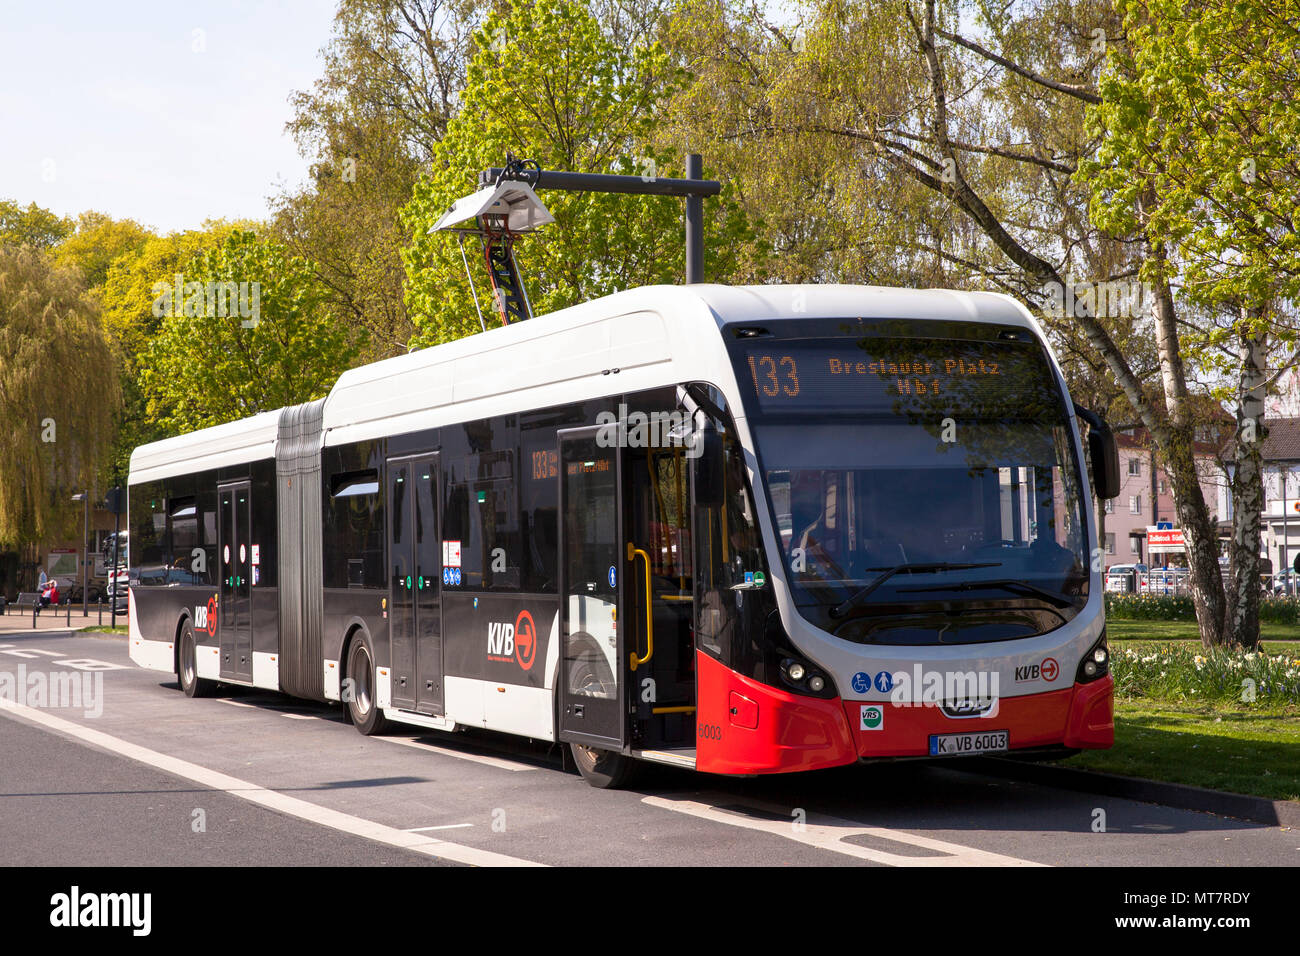 electric bus of the line 133 at a charging station at Hoeninger Platz, Cologne, Germany.  Elektrobus der Linie 133 an einer Ladestation am Hoeninger P Stock Photo